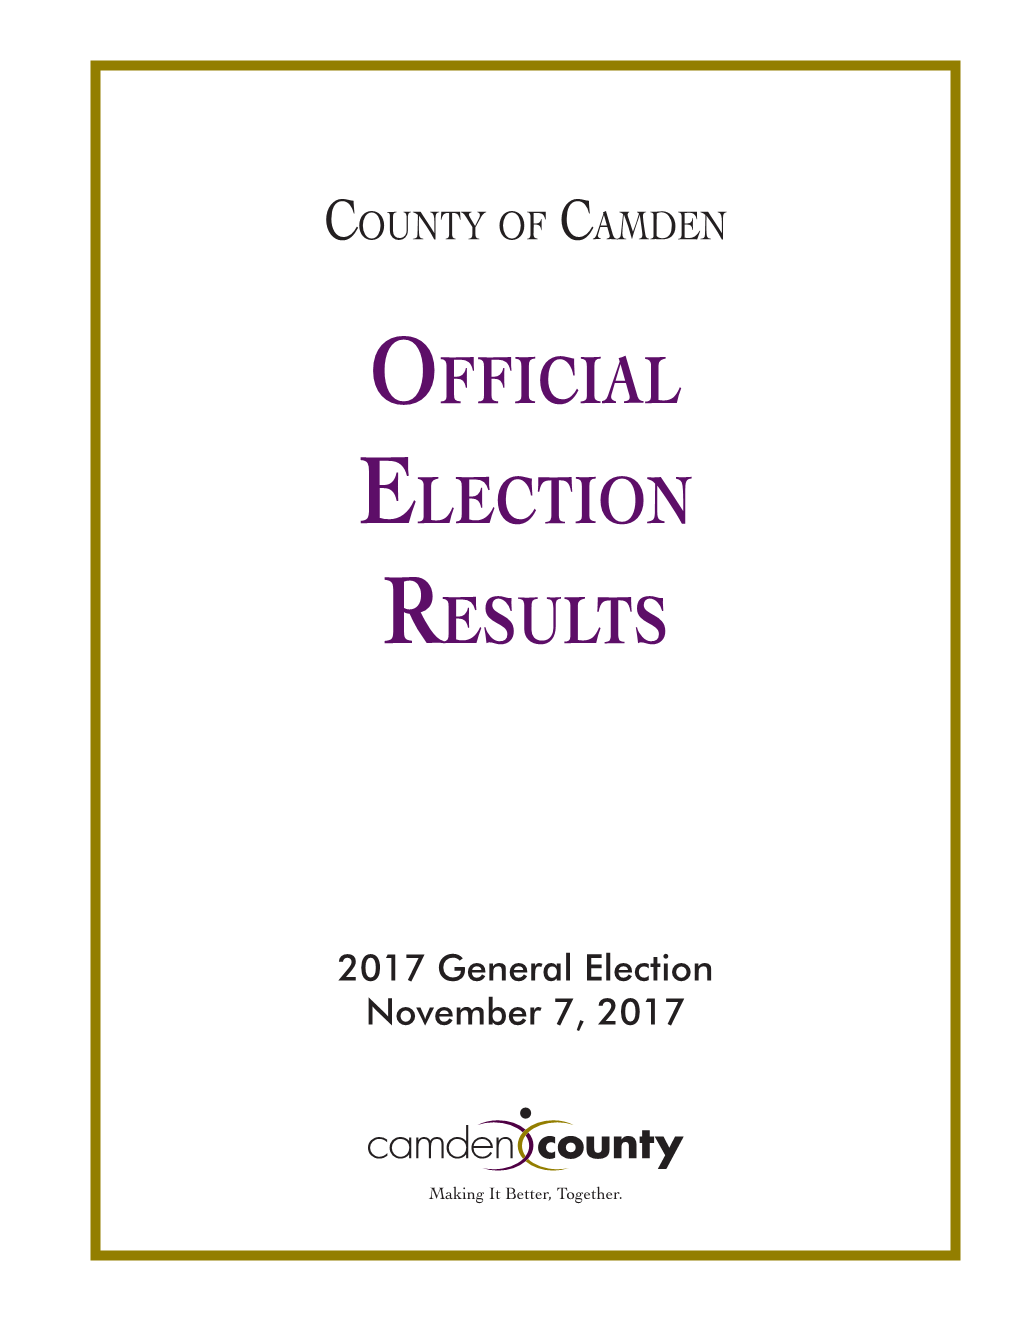 Complete and Official 2017 General Election Results